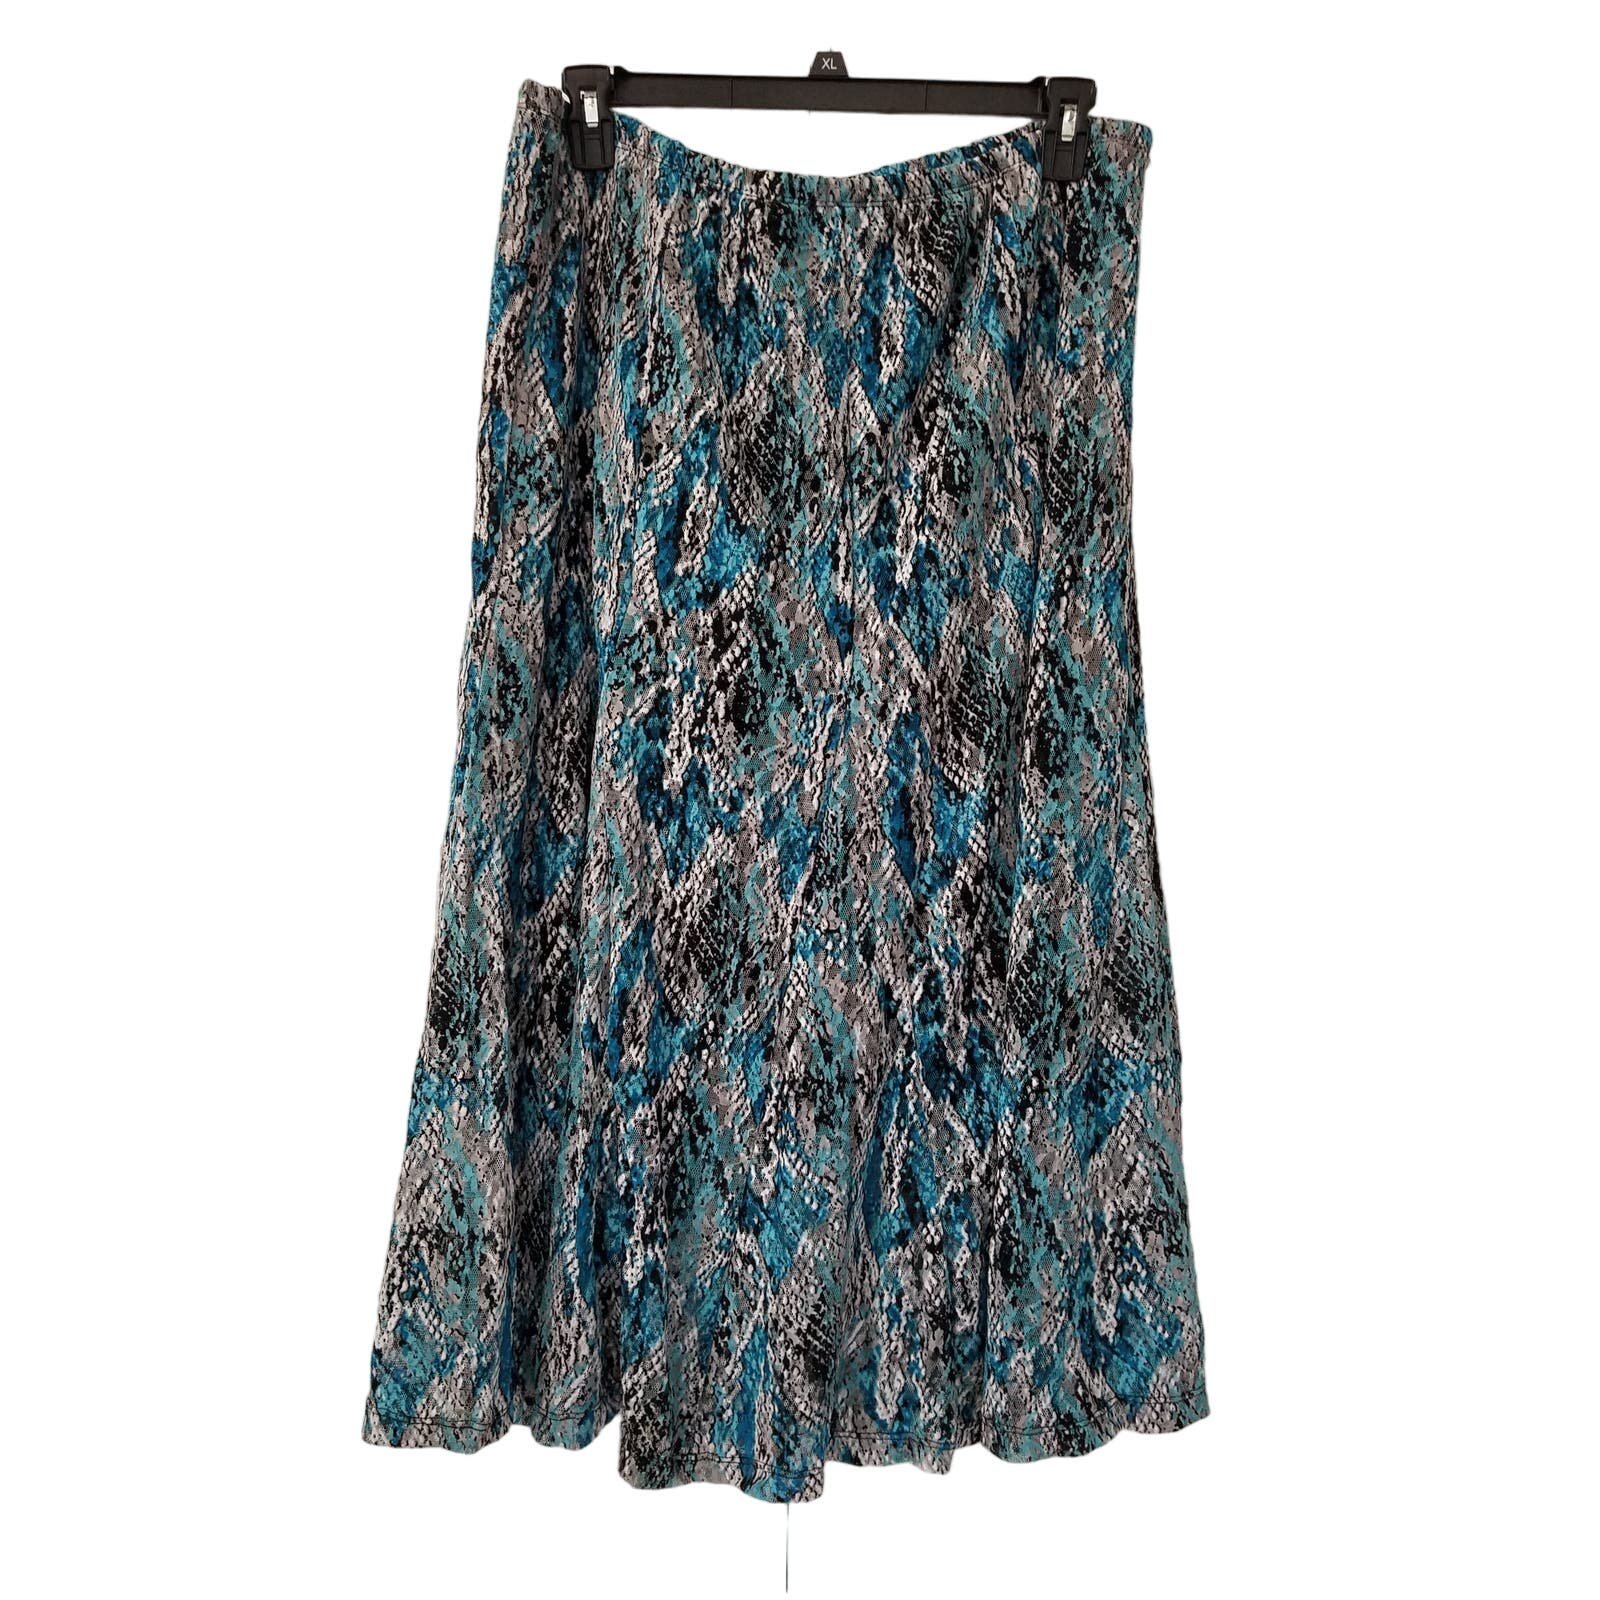 Simple JM Collection Woman Pull-On Midi Skirt Blue Multi Size 2X NWT $60 OOPaVRfbT Fashion